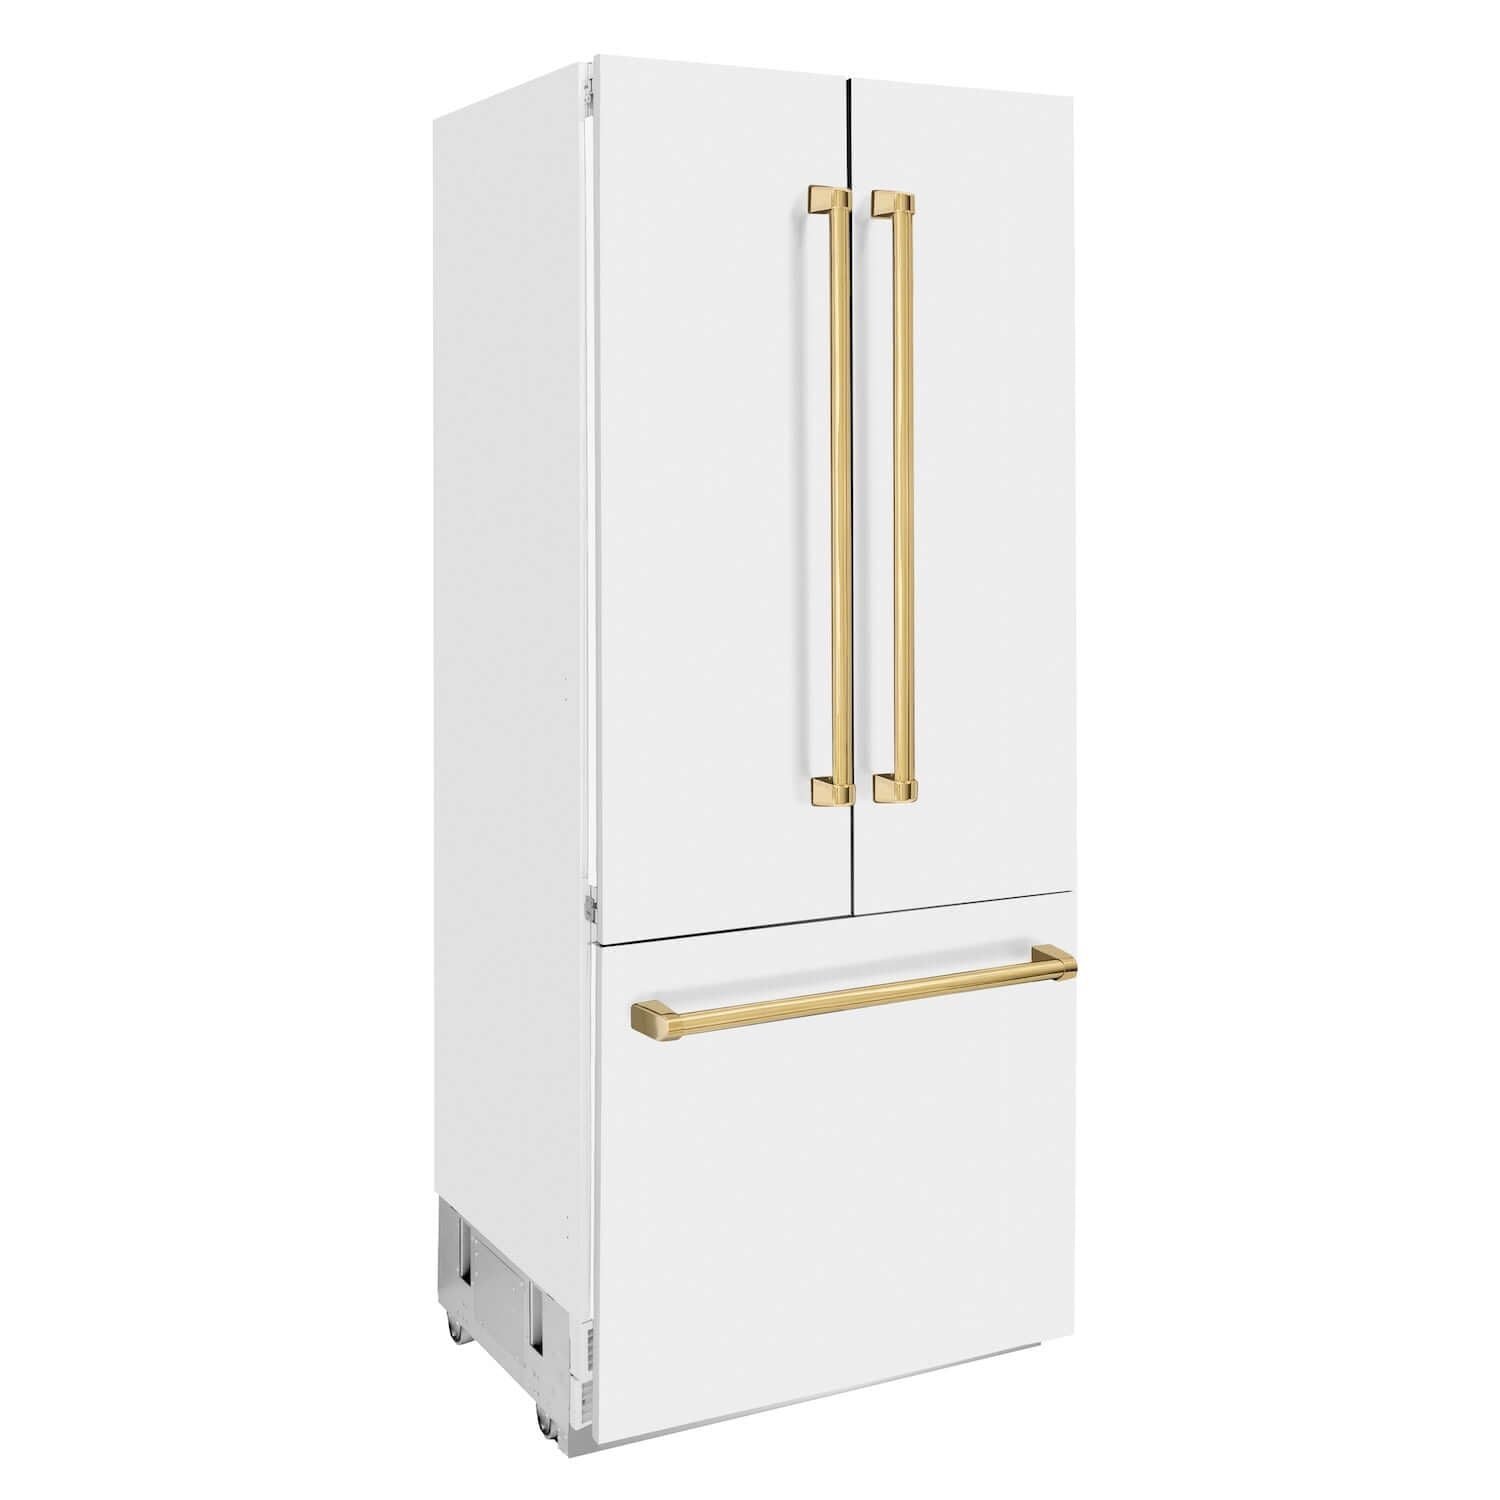 ZLINE 36" Autograph Edition Built-in French Door Refrigerator with White Matte panels and accent handles side.